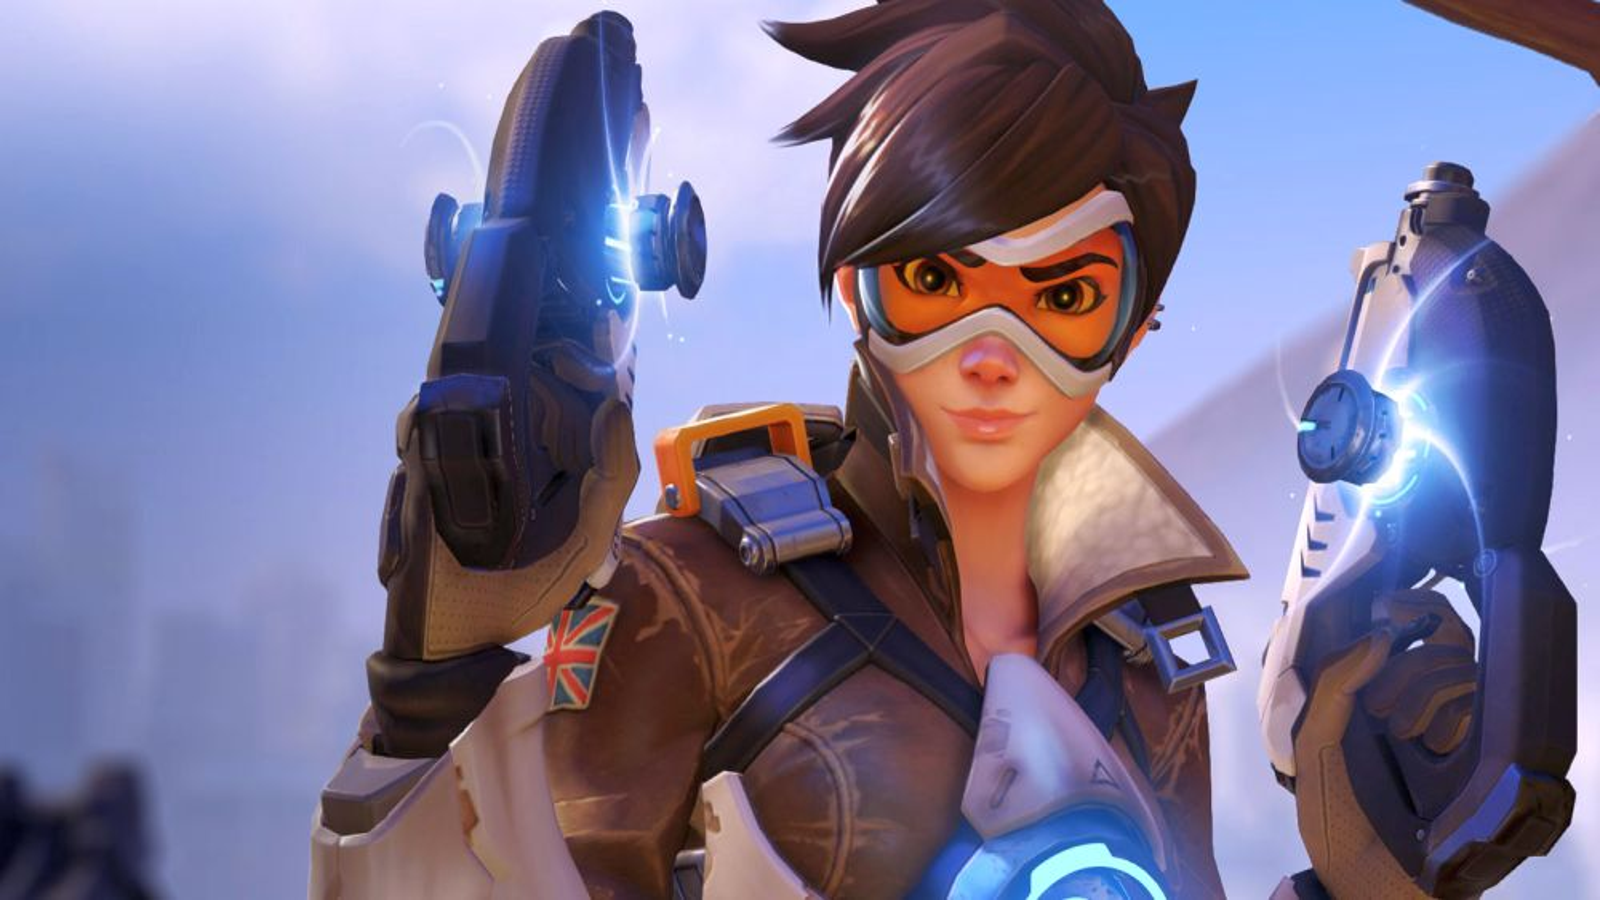 Tracer received powerful new movement ability in Overwatch PTR